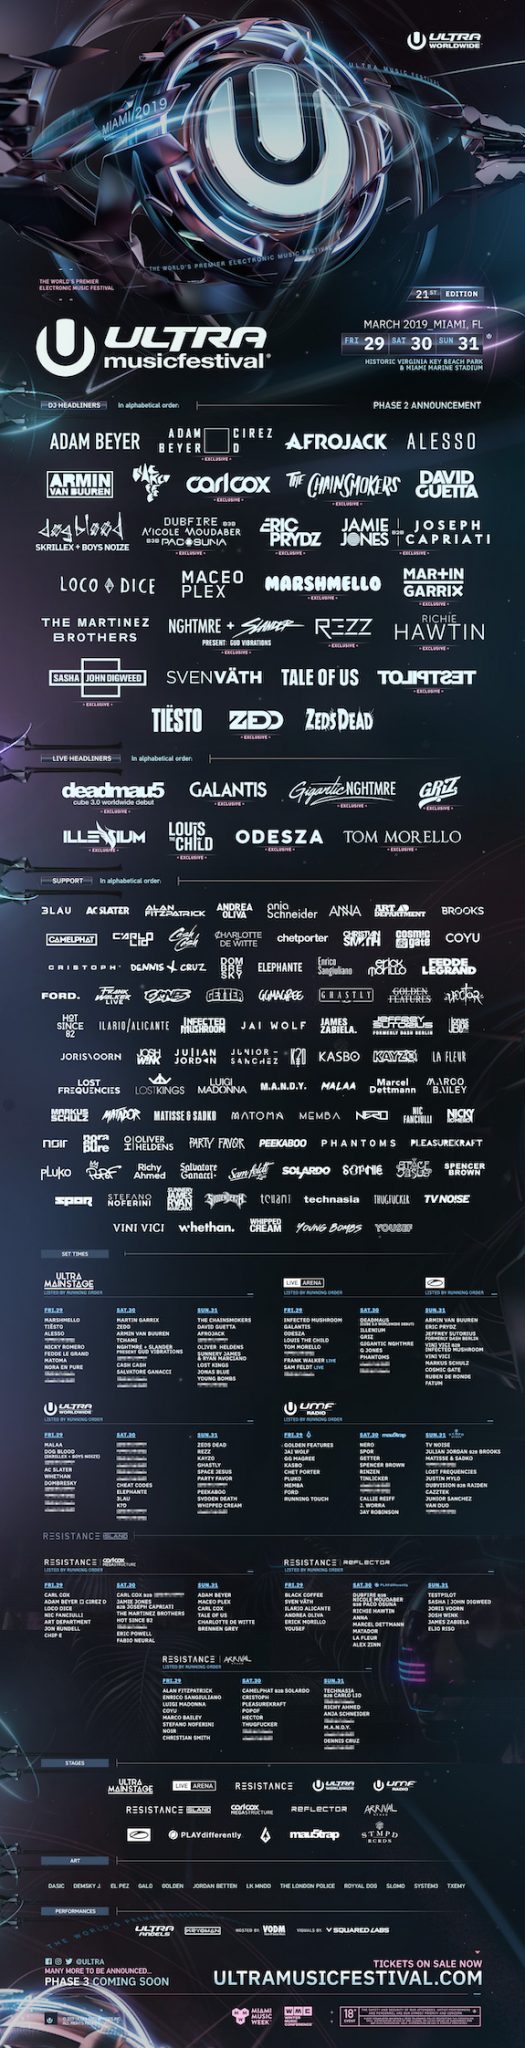 Ultra Music Festival 2019 Announces Phase Two Lineup